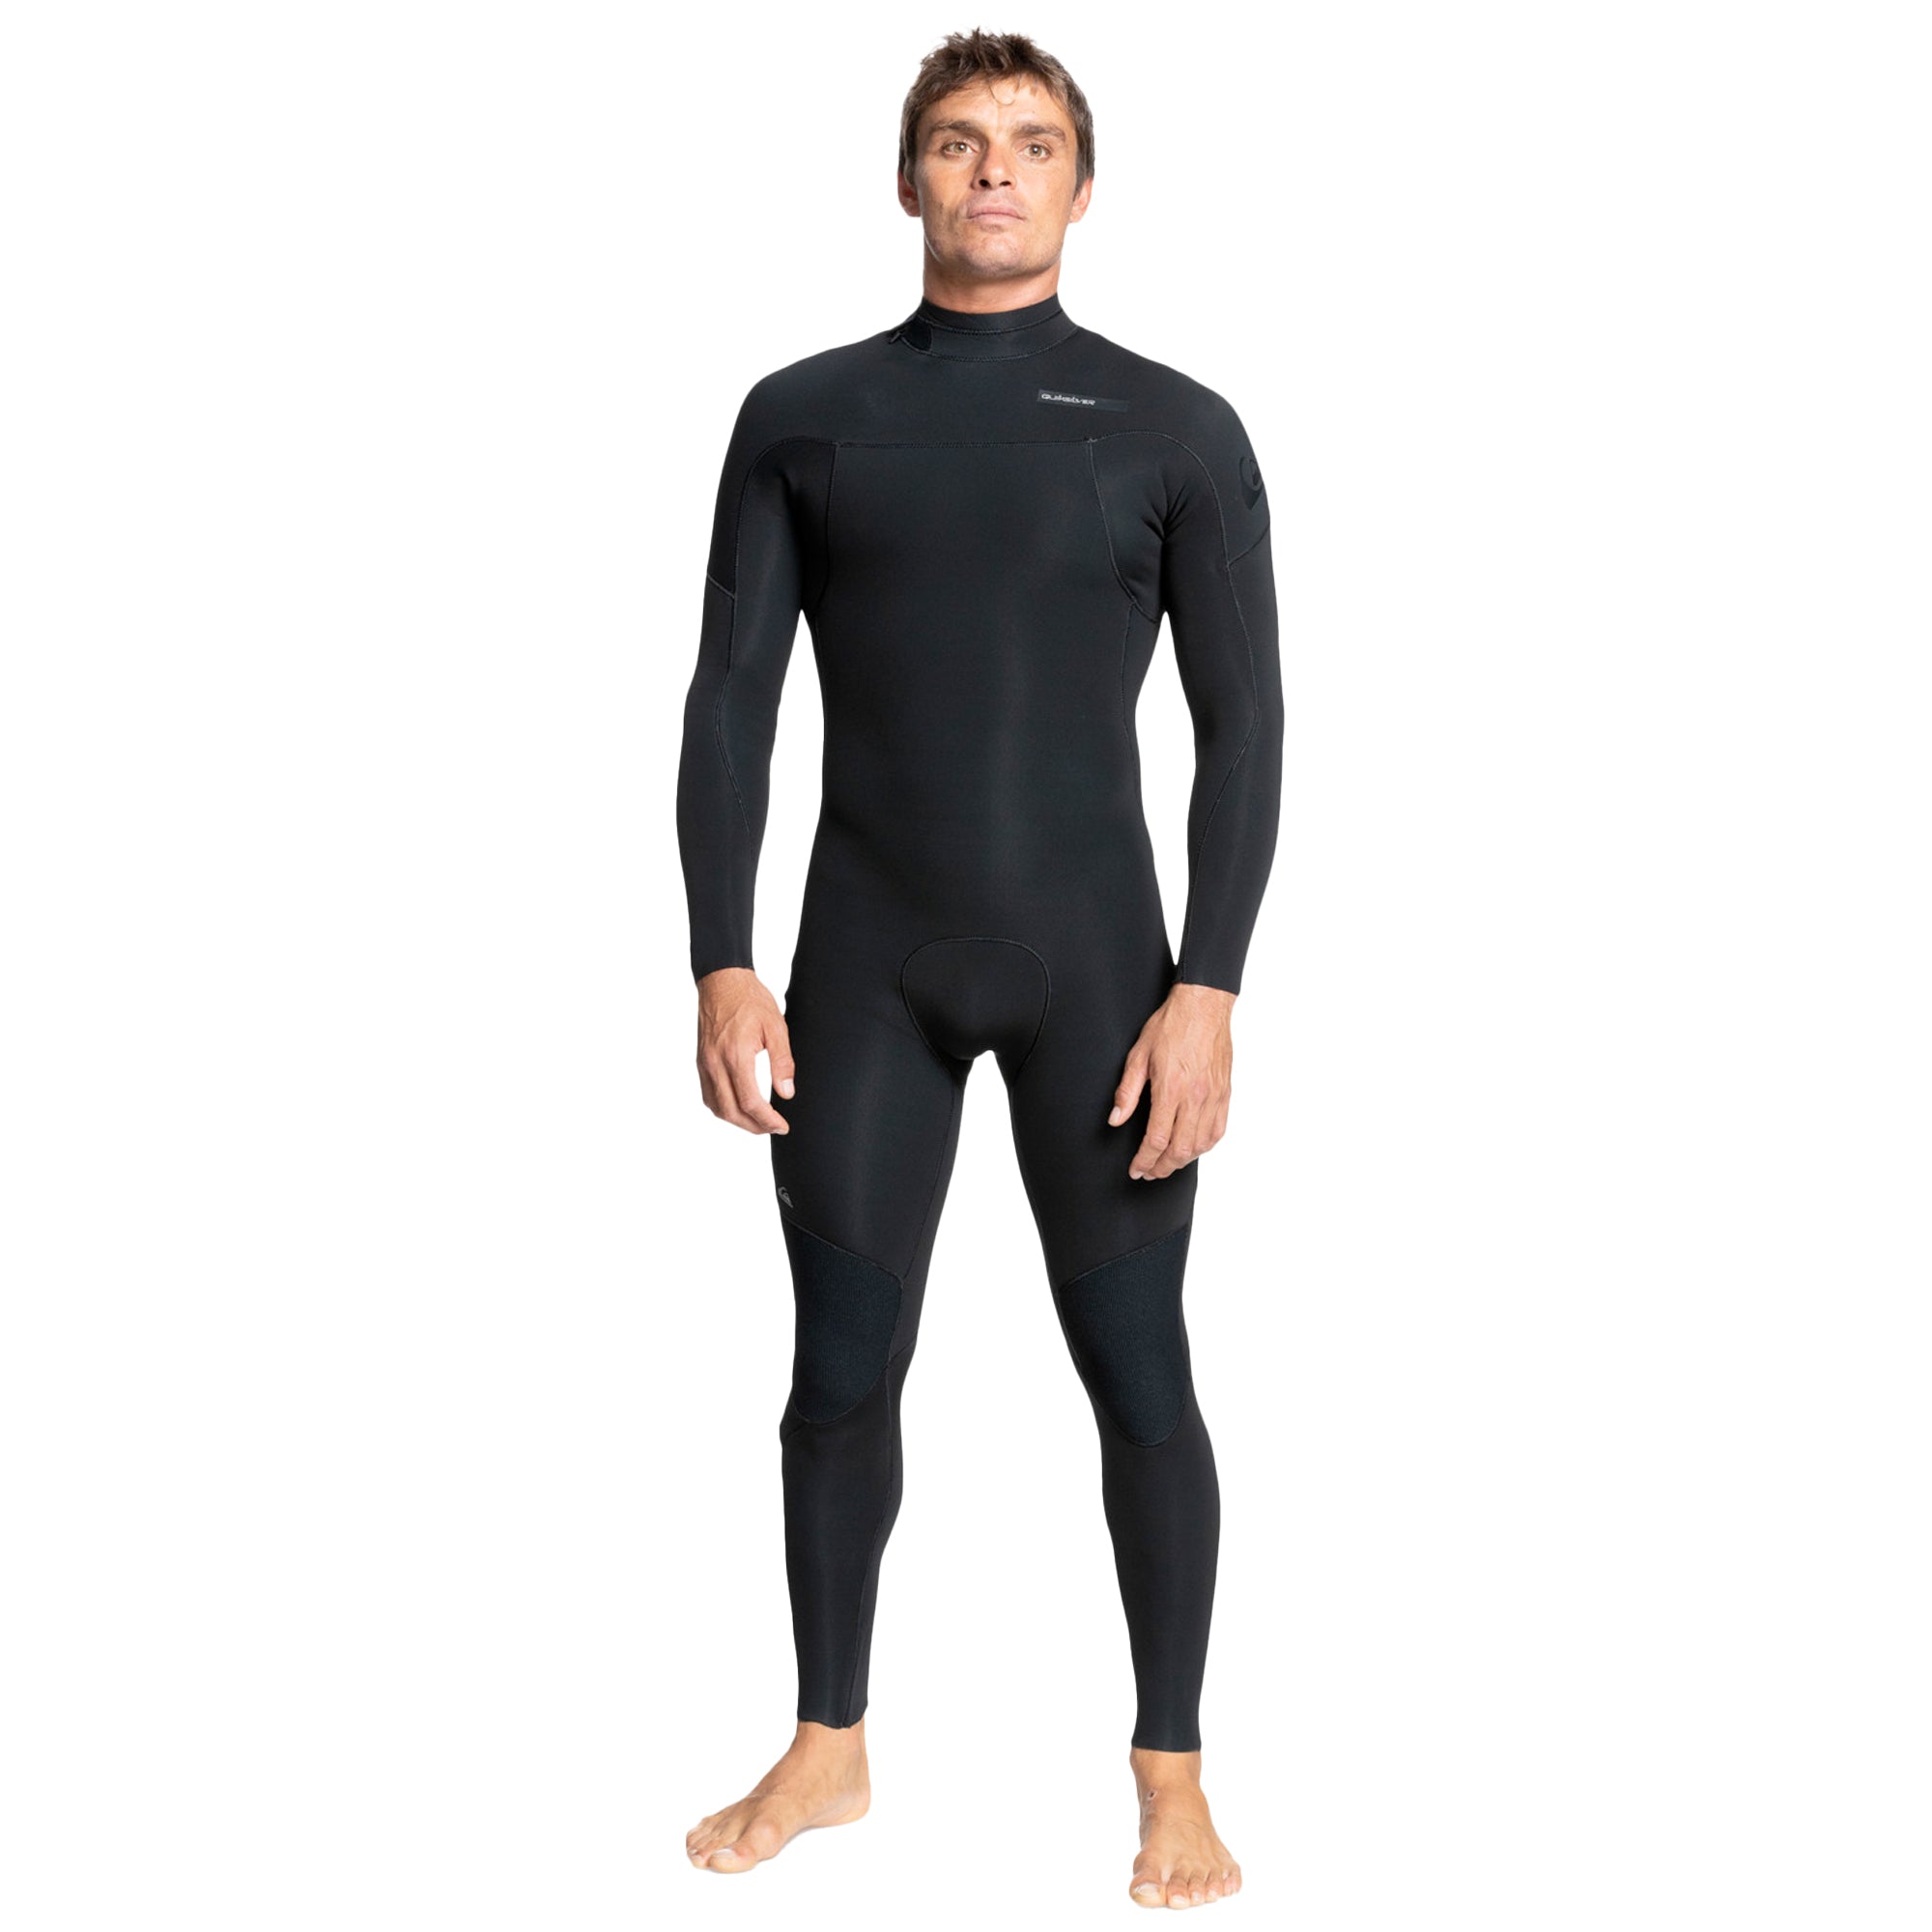 Quiksilver Every Day Sessions 3/2mm Men's Back-Zip Wetsuit